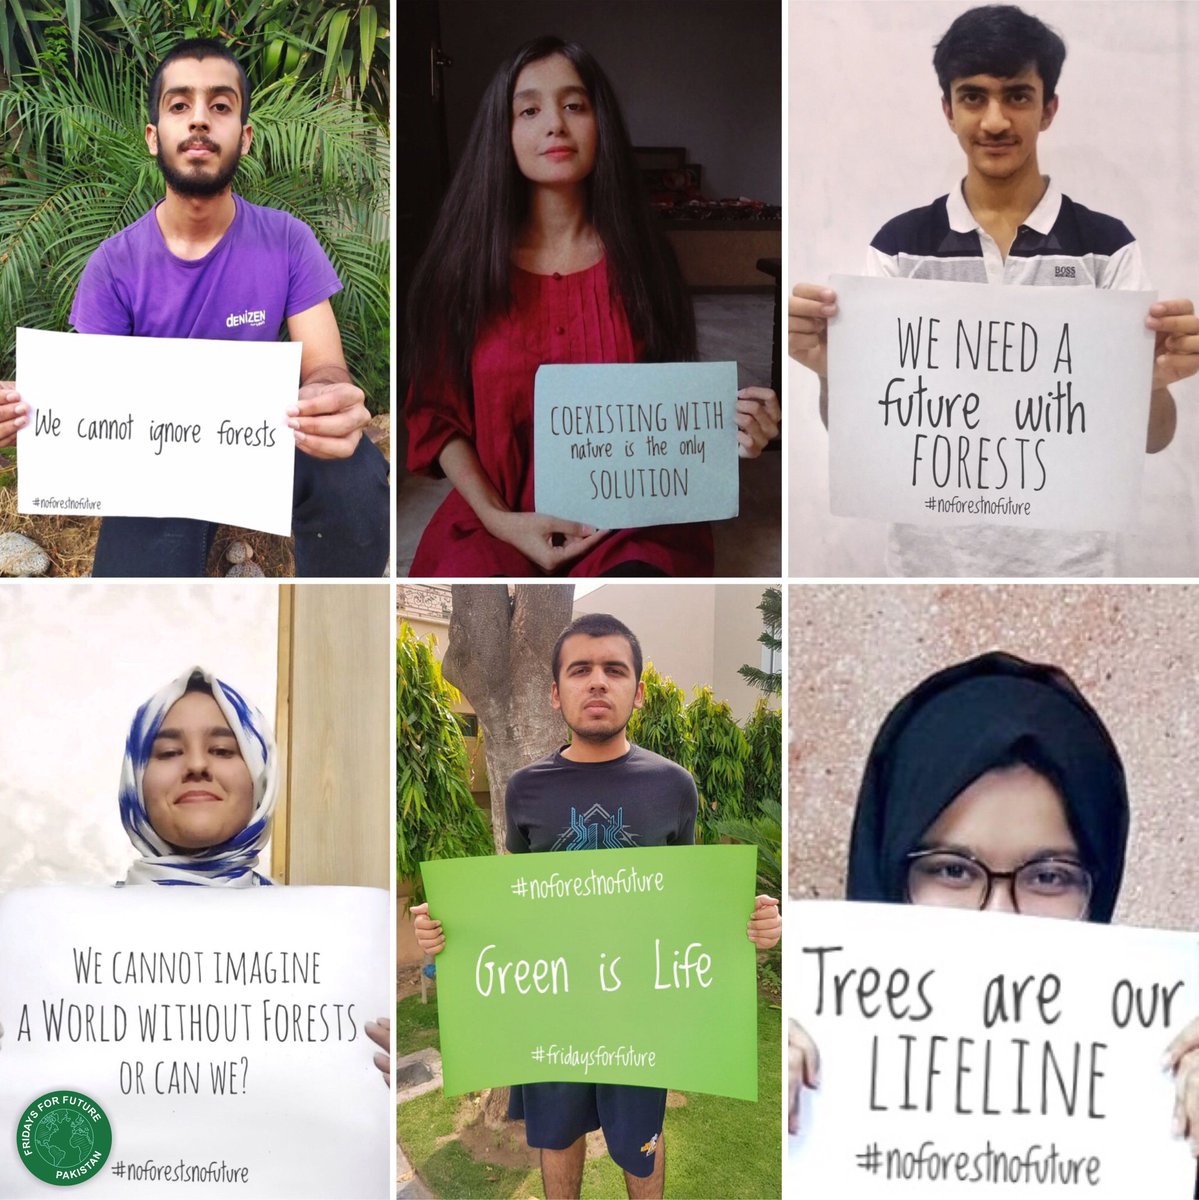 FridaysForFuture Pakistan and it's Activists took part in the #ForestForFuture Digital Strike Campaign this Friday. @GretaThunberg
#ClimateActionNow